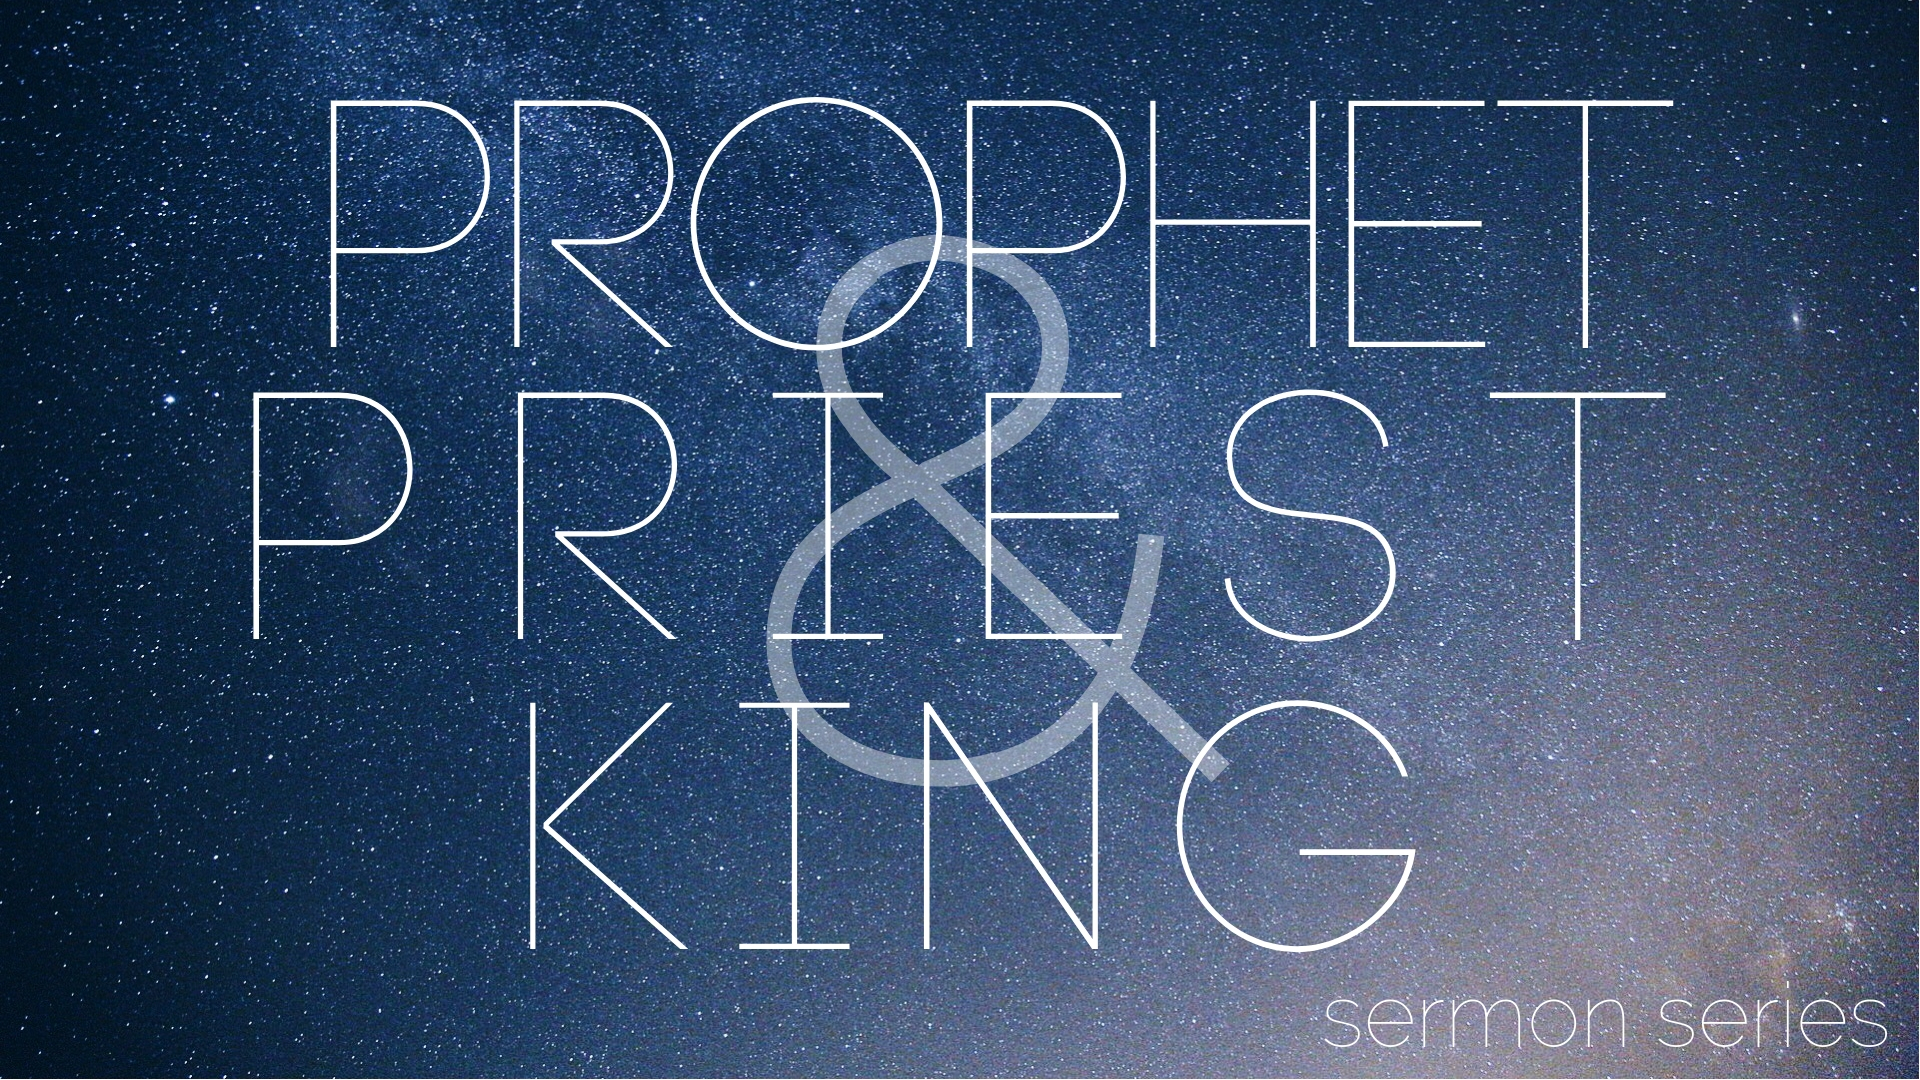 Prophet, Priest and King